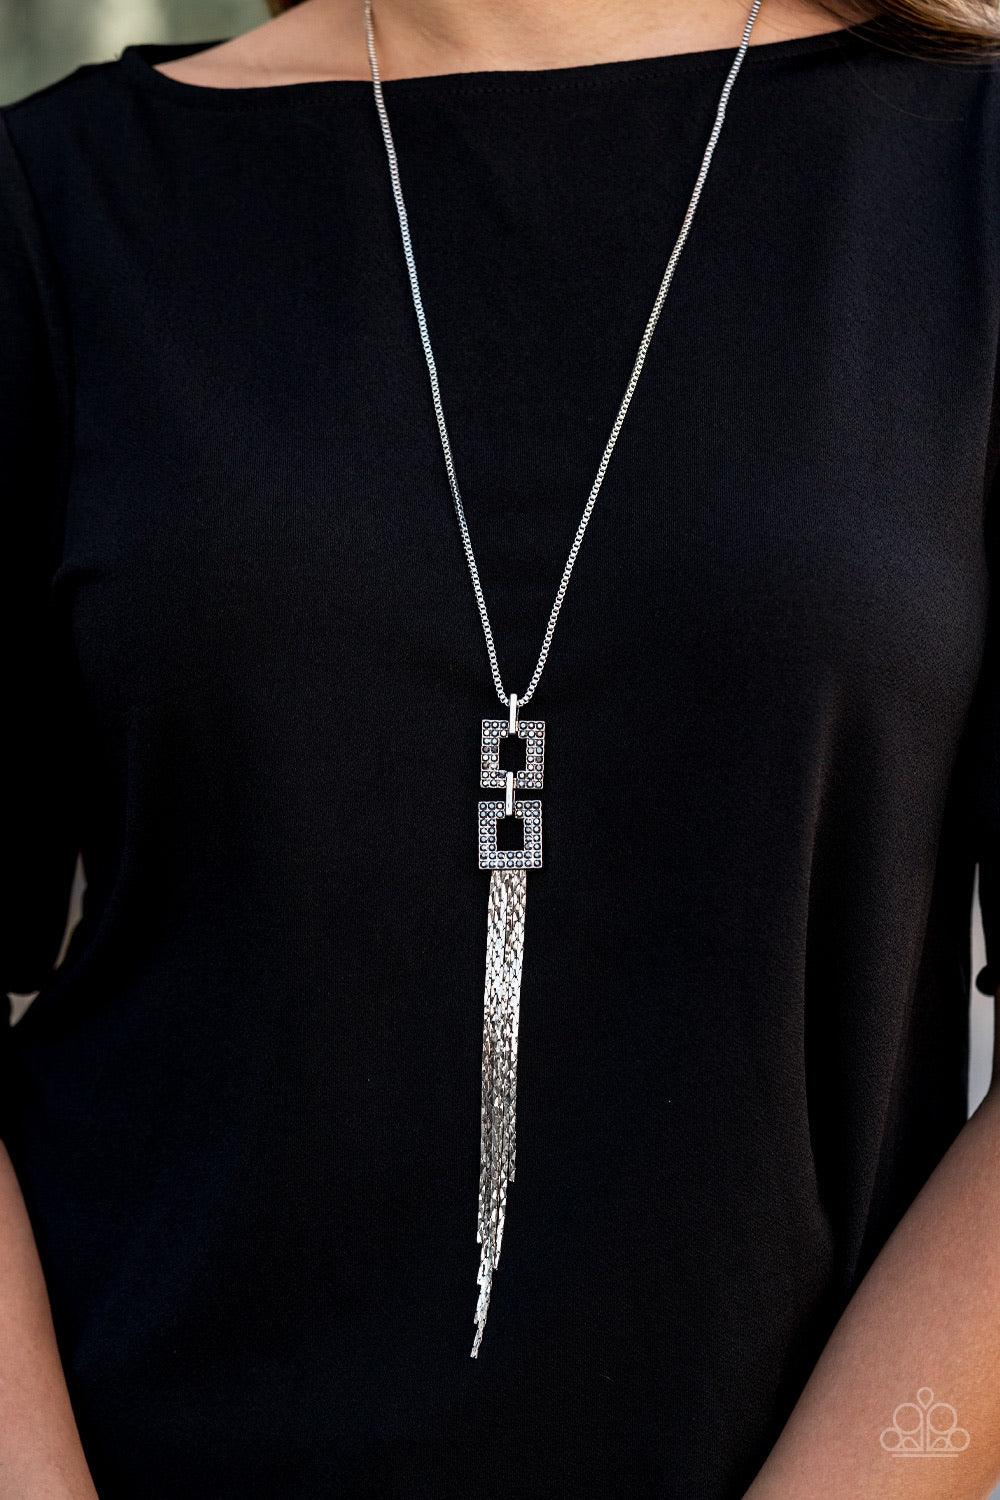 Paparazzi Accessories Times Square Stunner - Silver Encrusted in smoky hematite rhinestones, two squared, silver frames link at the bottom of a lengthened silver box chain. Flattened silver chains stream from the bottom of the stacked pendant, creating an